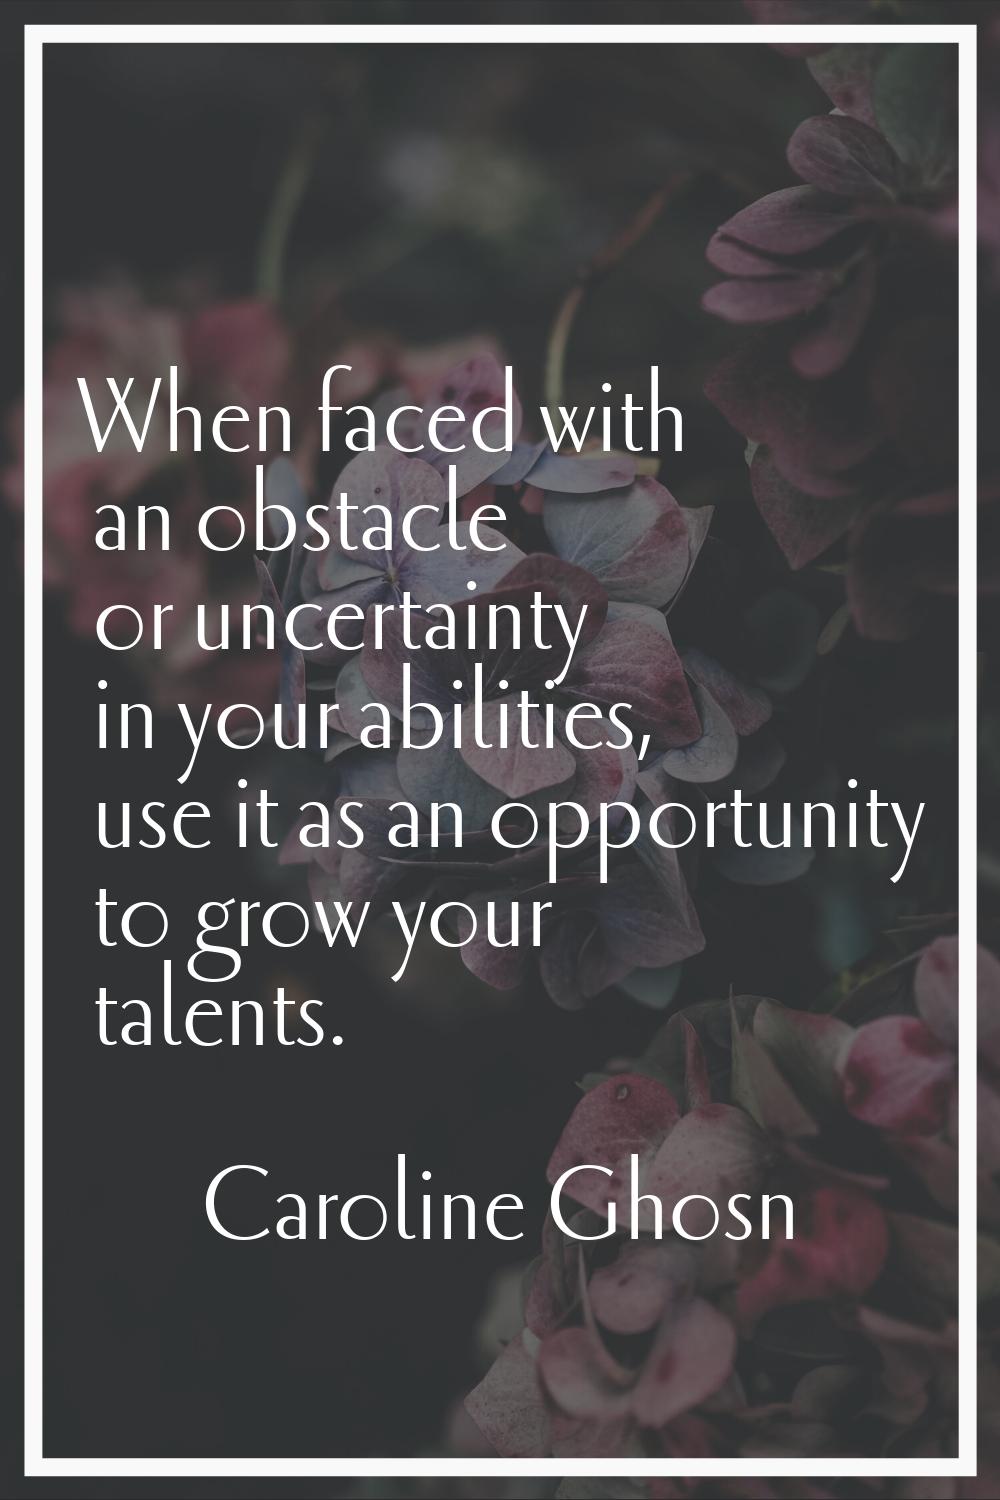 When faced with an obstacle or uncertainty in your abilities, use it as an opportunity to grow your